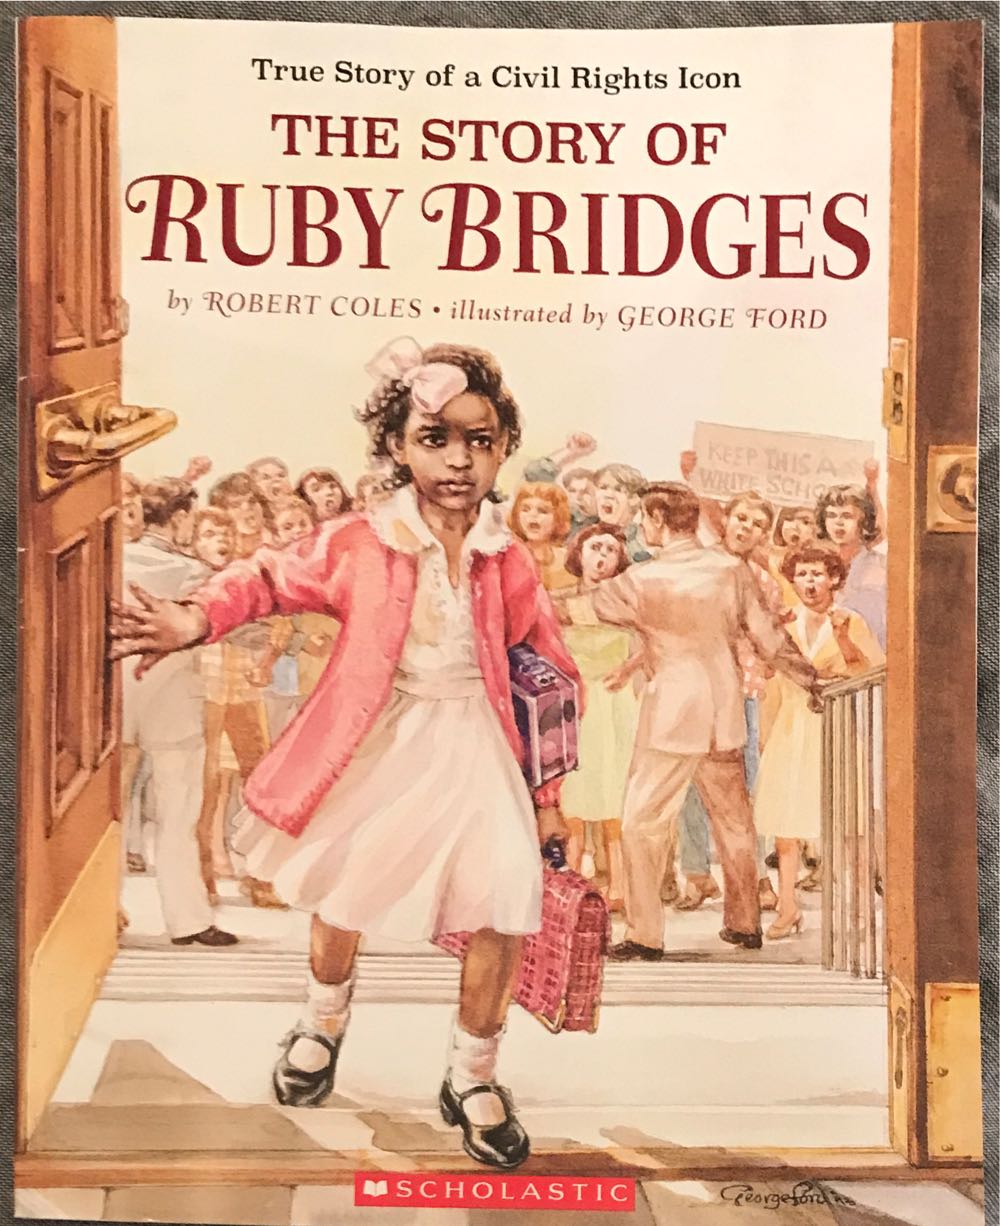 The Story Of Ruby Bridges - Robert Coles (Scholastic Press - Paperback) book collectible [Barcode 9780439472265] - Main Image 2